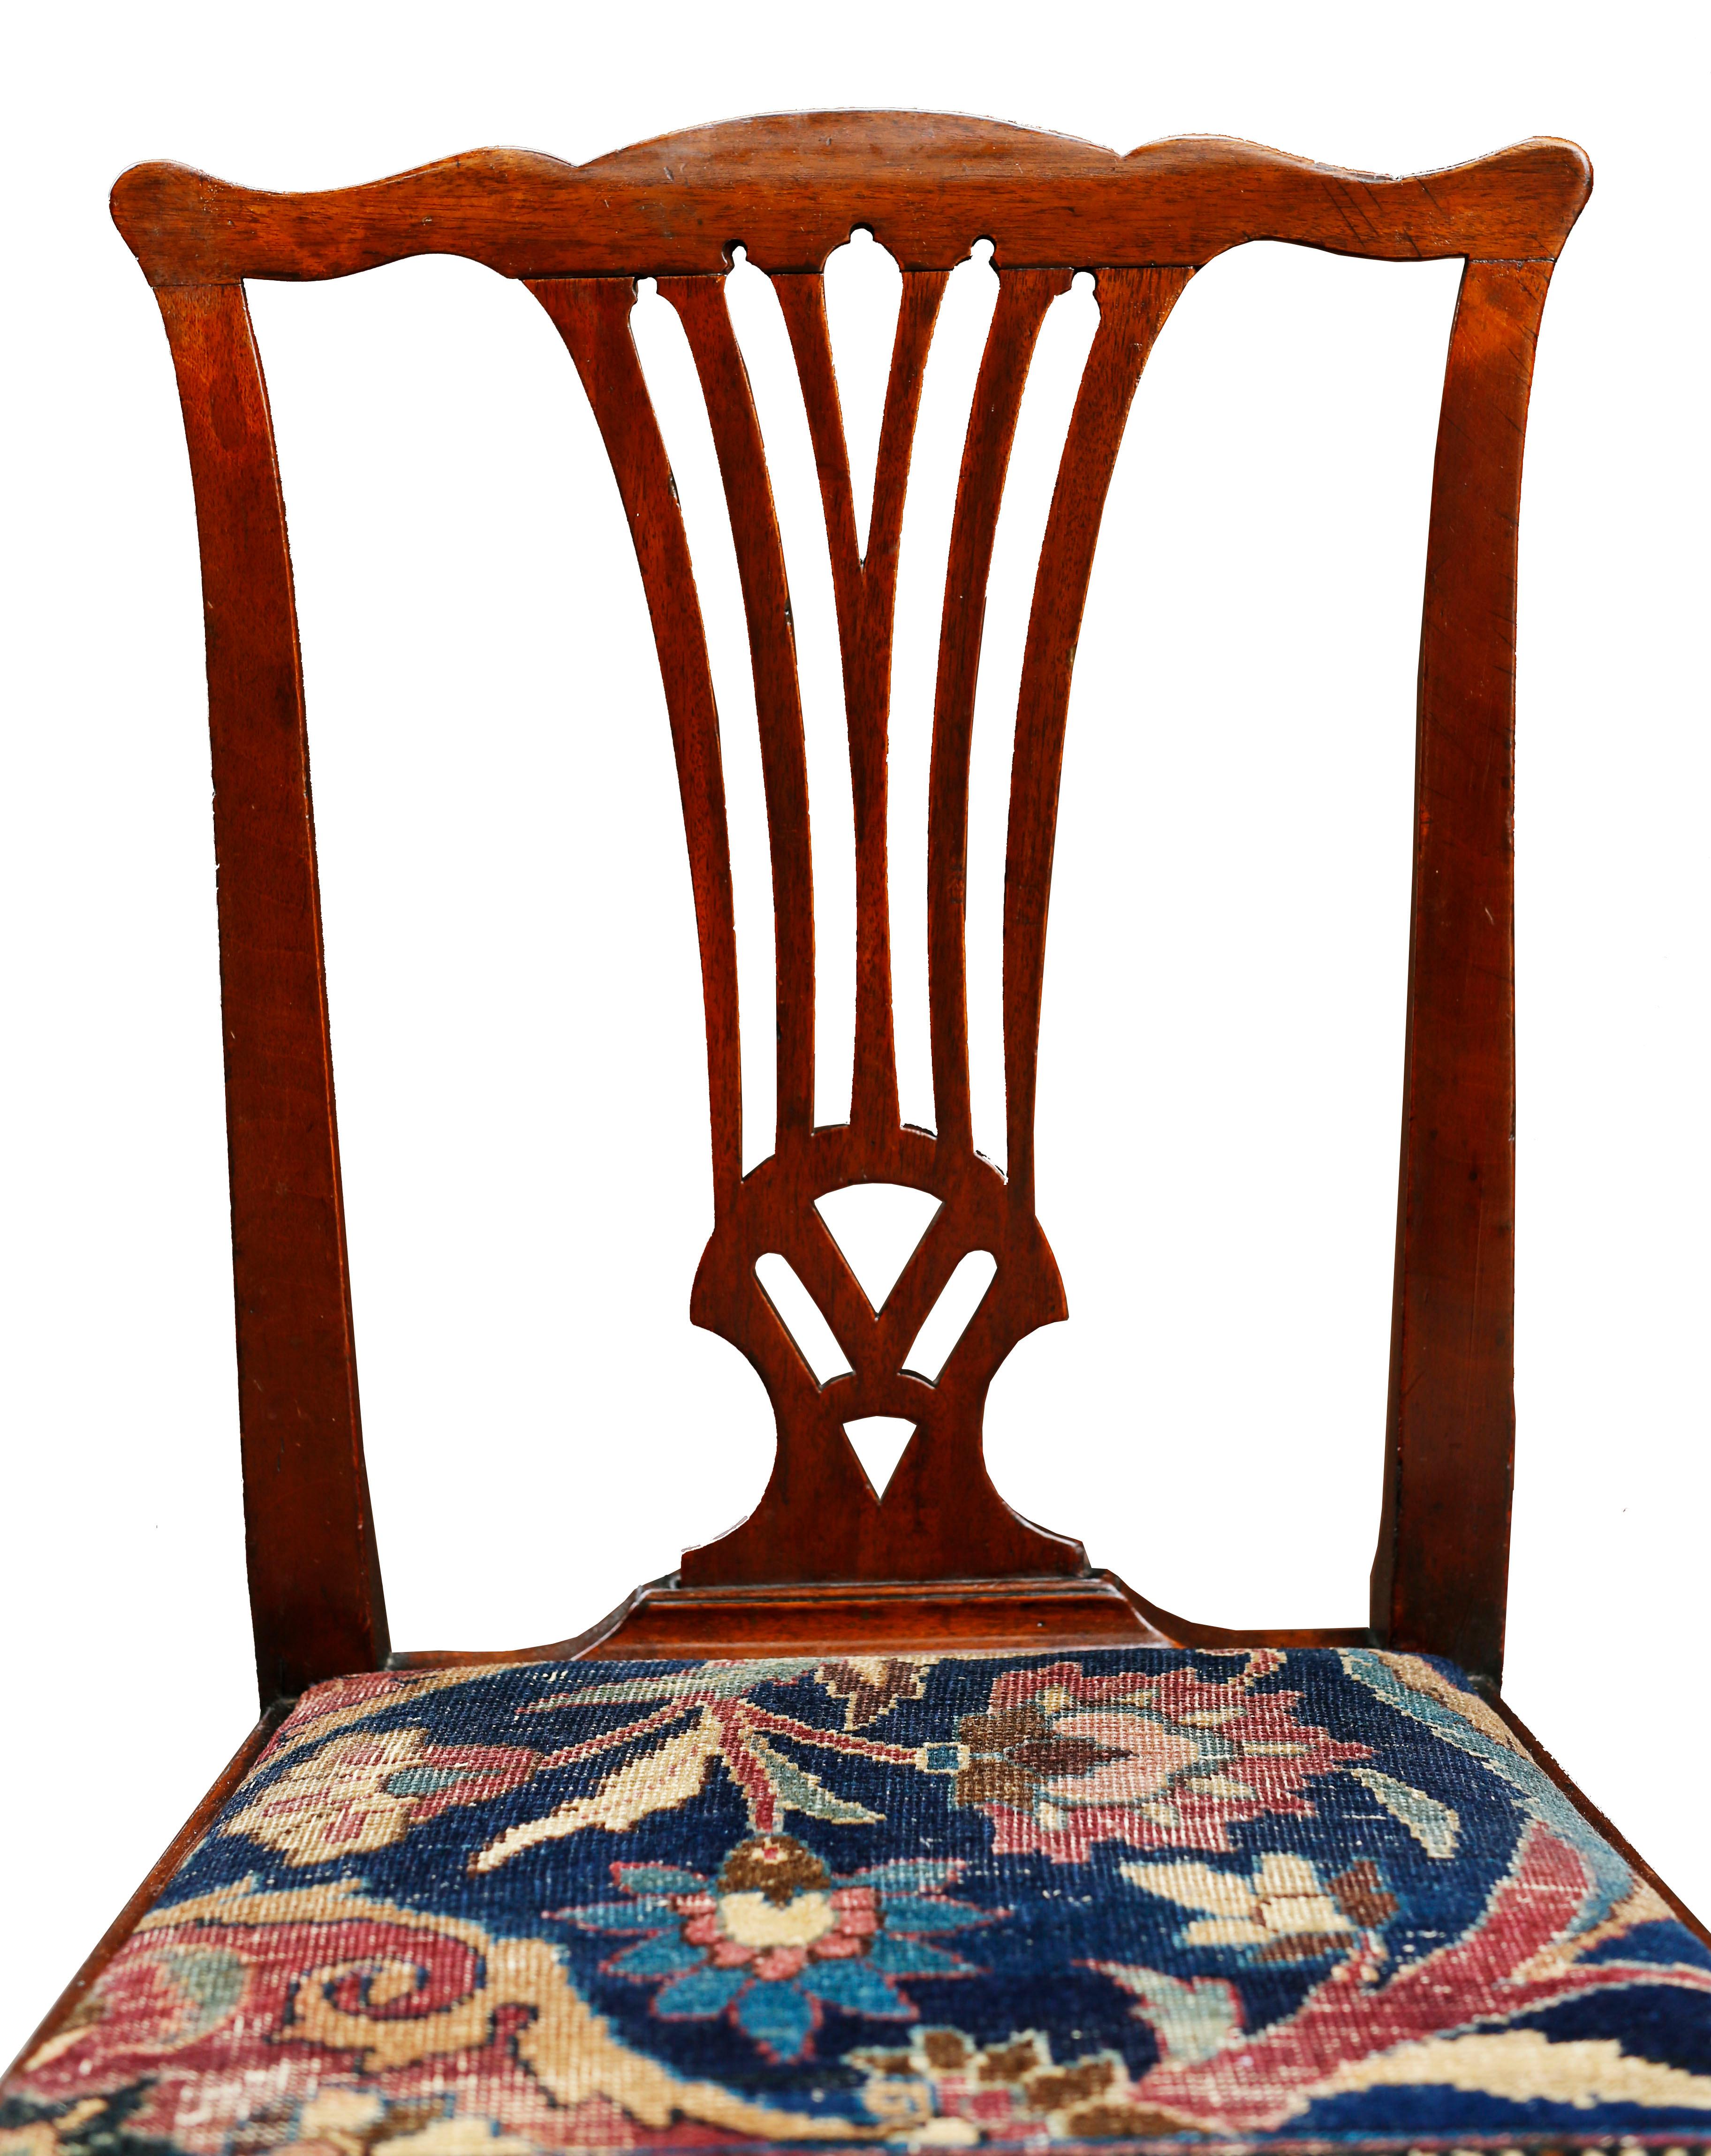 Wool Mid-18th Century American Walnut Chippendale Chairs with Ushak Seats